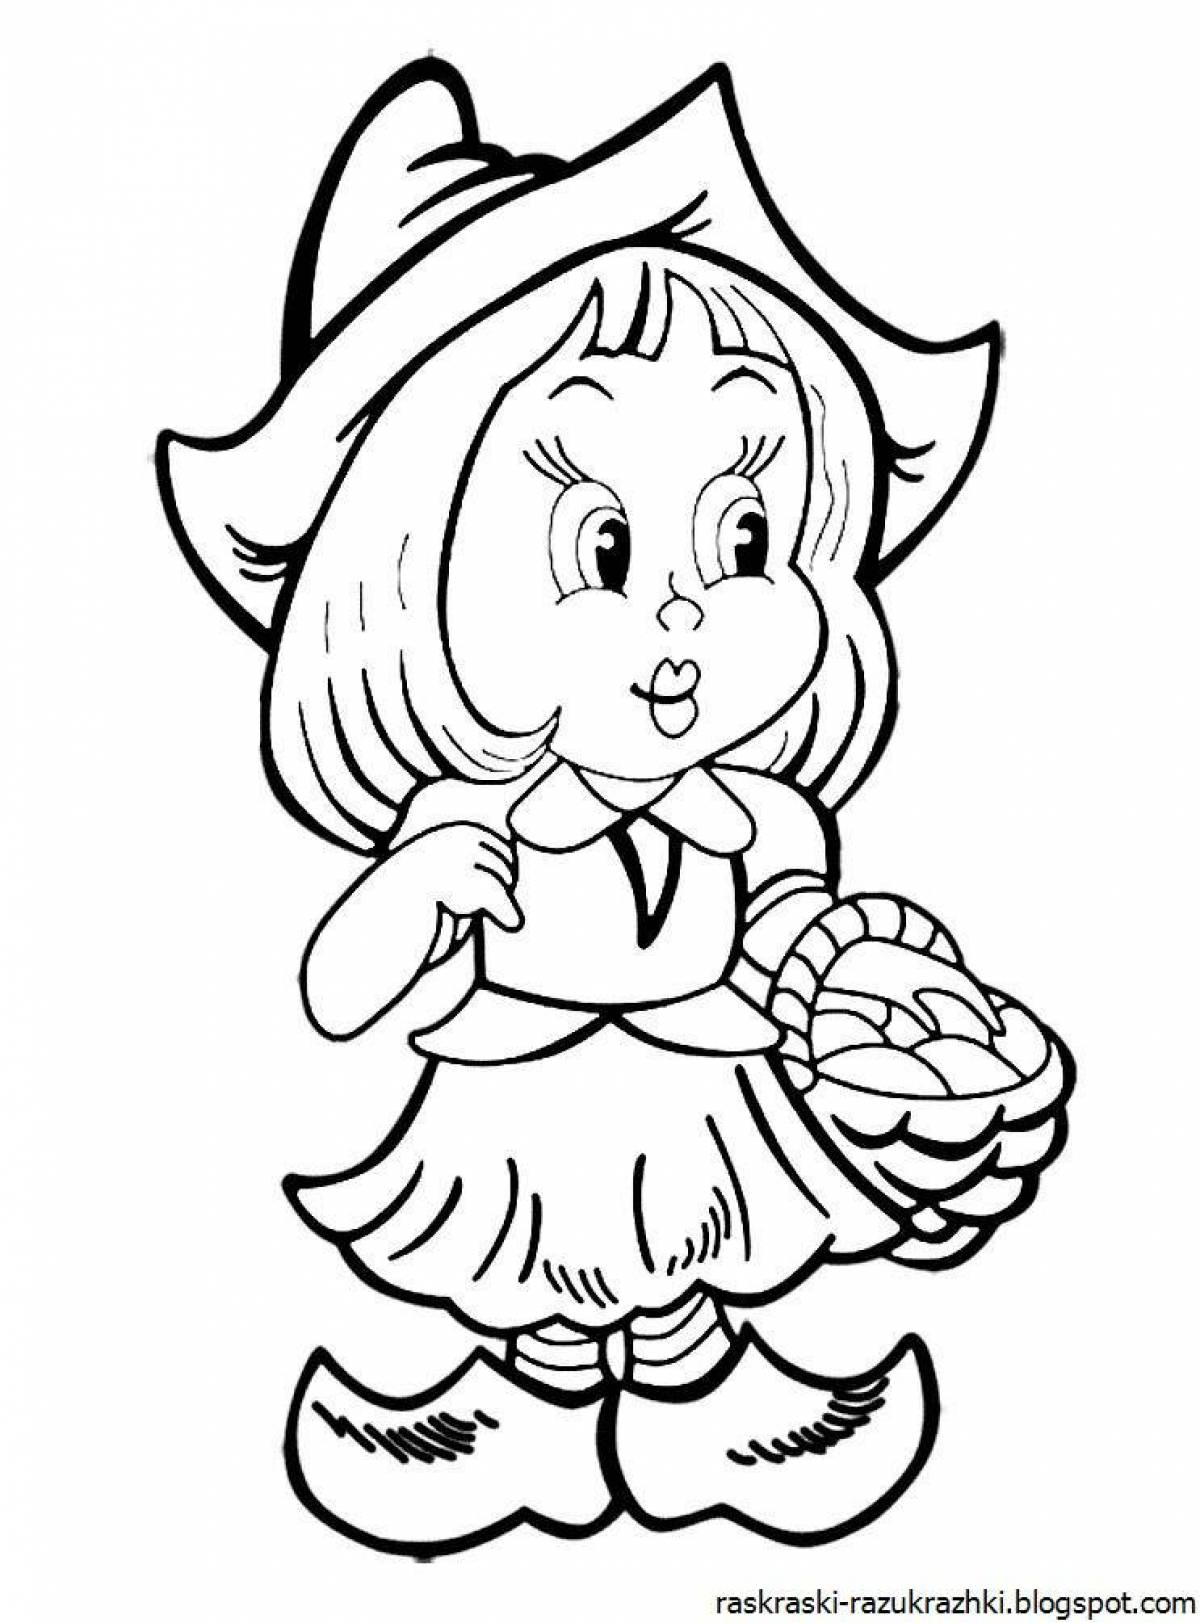 Crazy little red riding hood coloring page